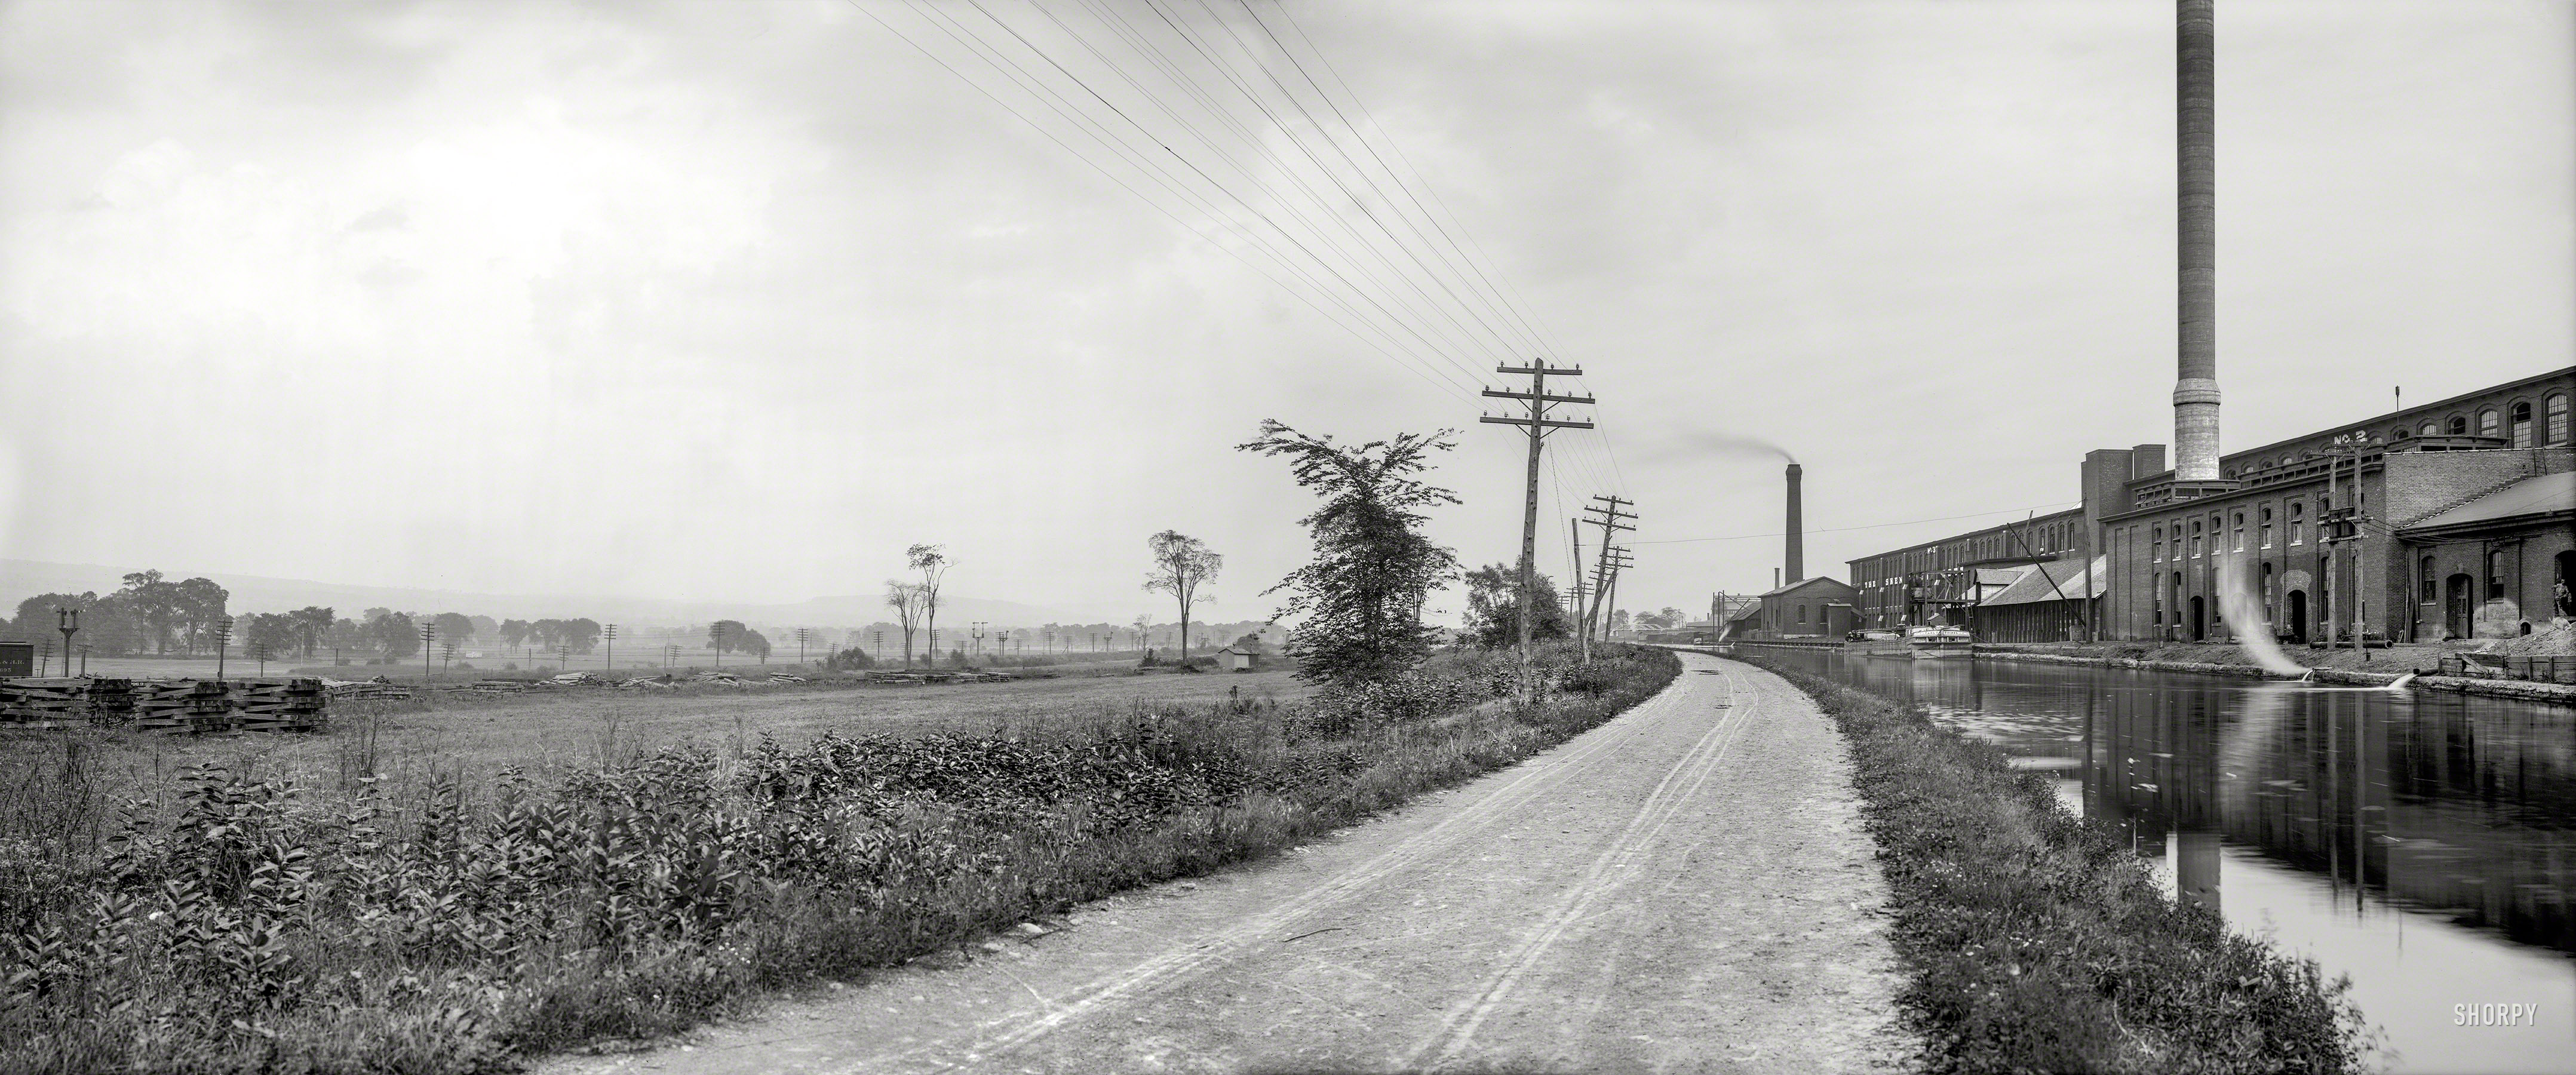 Circa 1905. "Erie Canal and Mohawk Valley, Utica, N.Y." Panorama of two 8x10 inch glass negatives, Detroit Publishing Company. View full size.